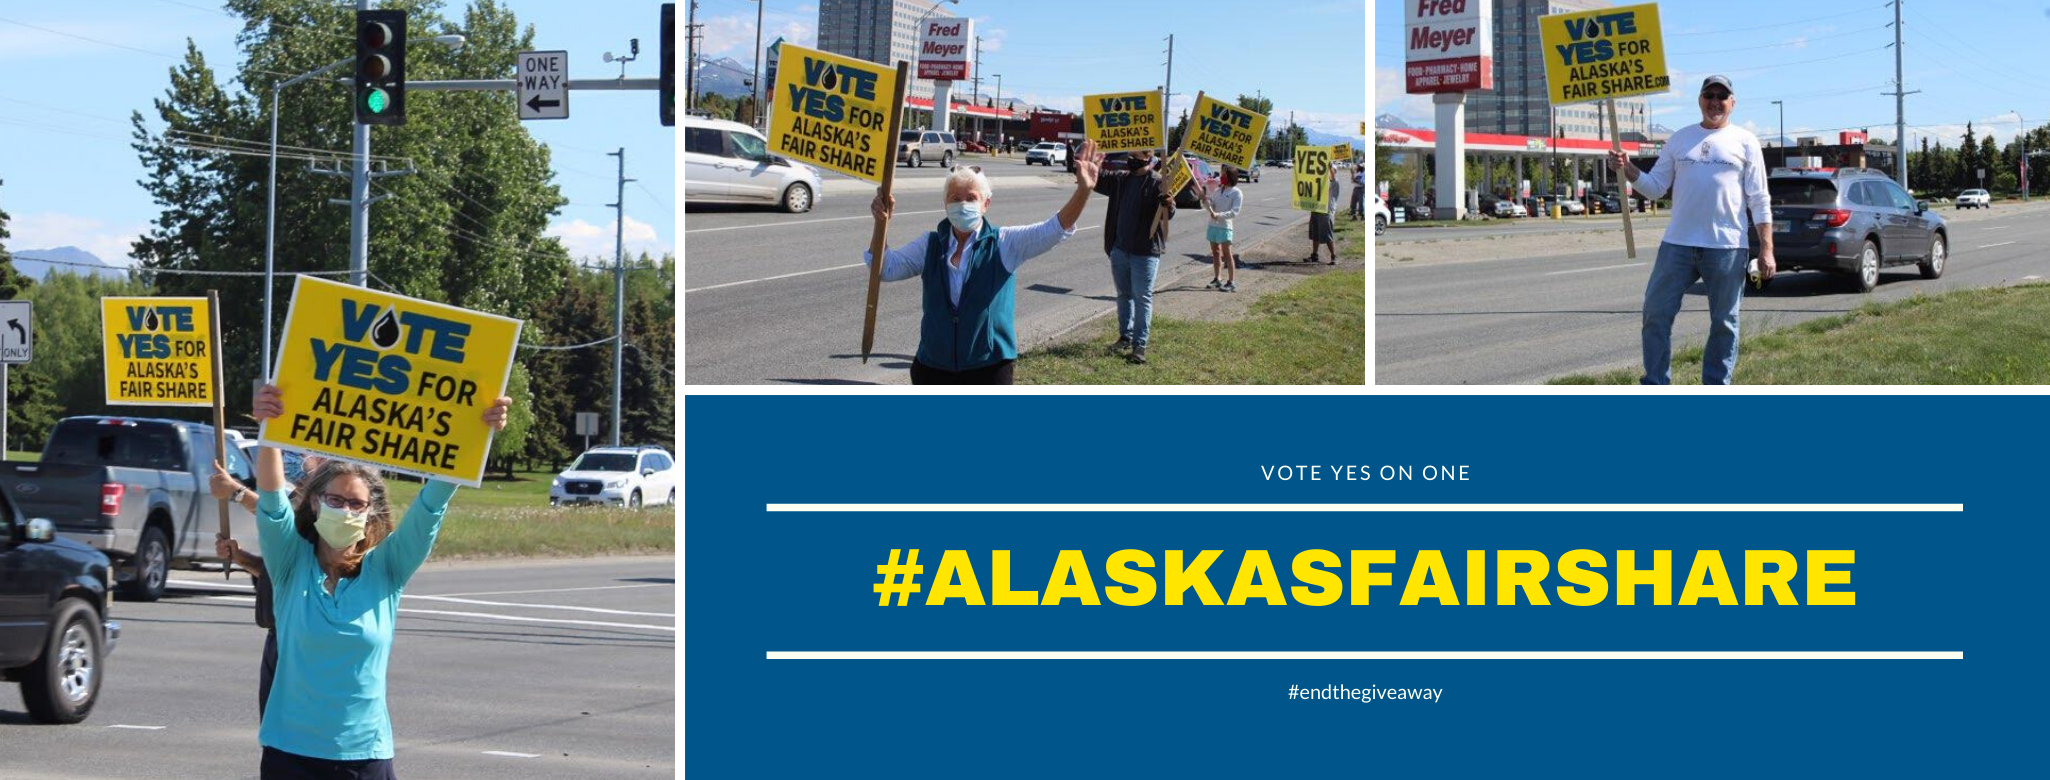 Vote Yes for Alaskas Fair Share